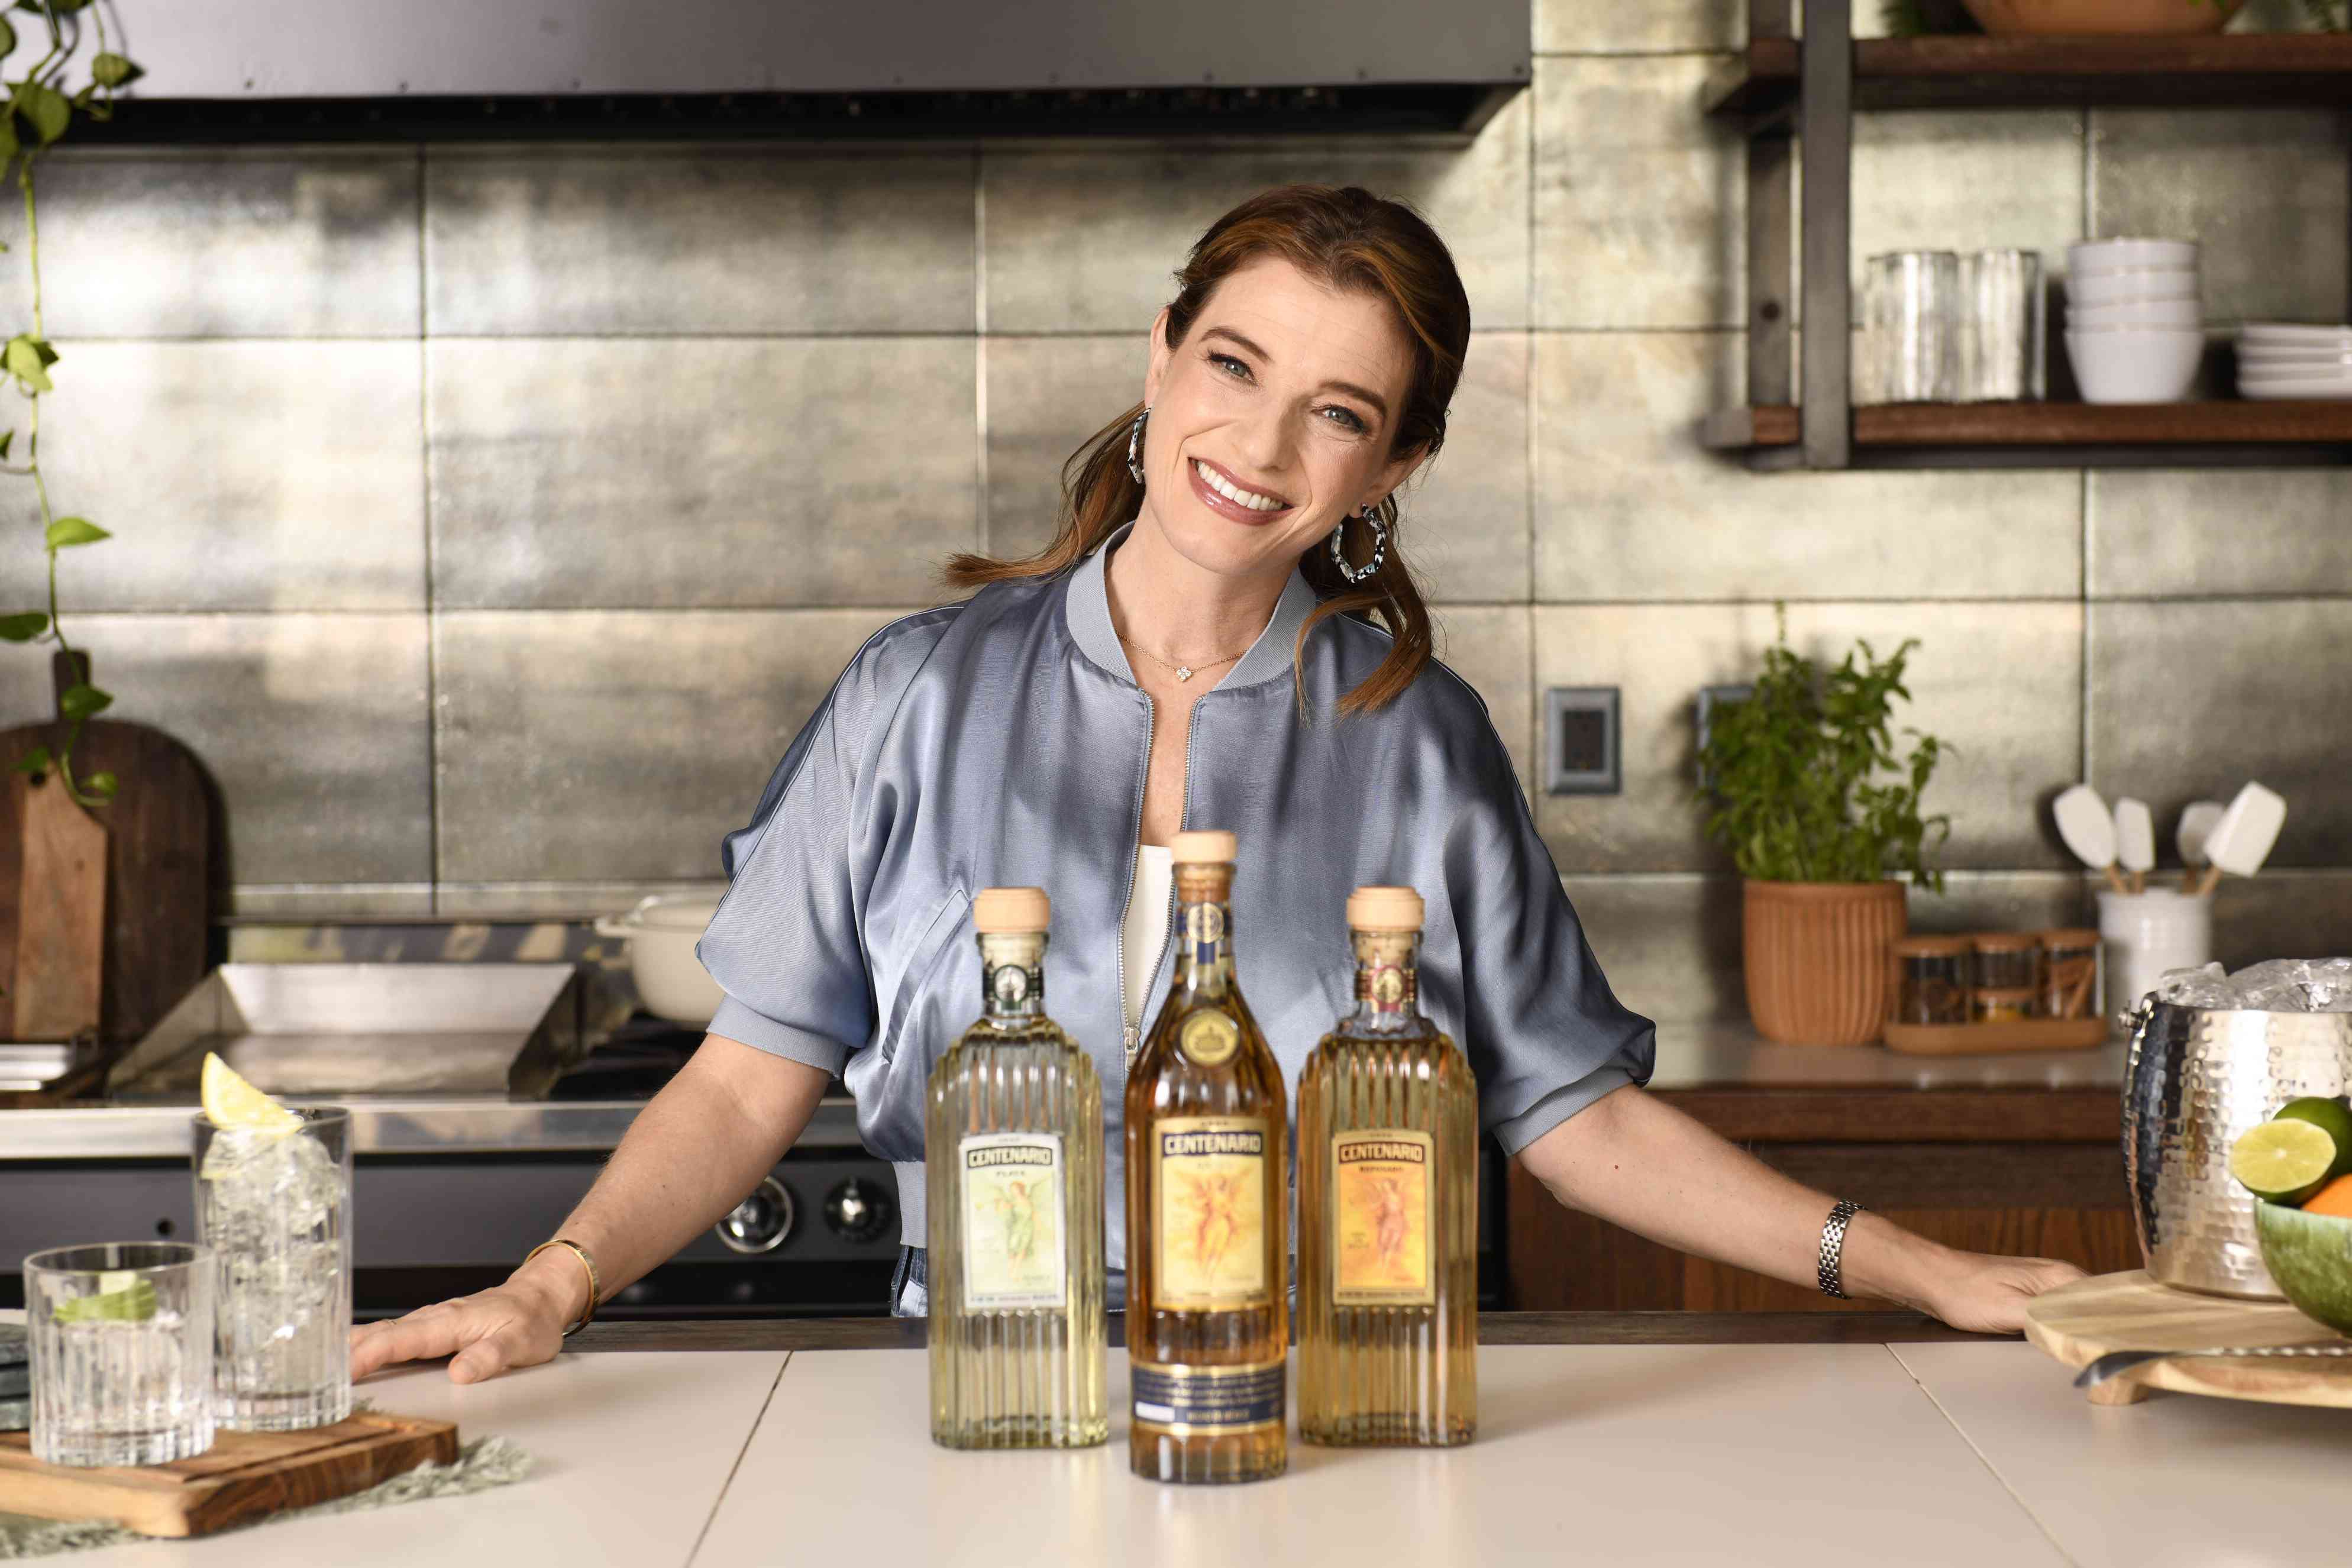 Pati Jinich Just Told Us the Pantry Staple Her Family Goes Through 3 Cans of Every Week